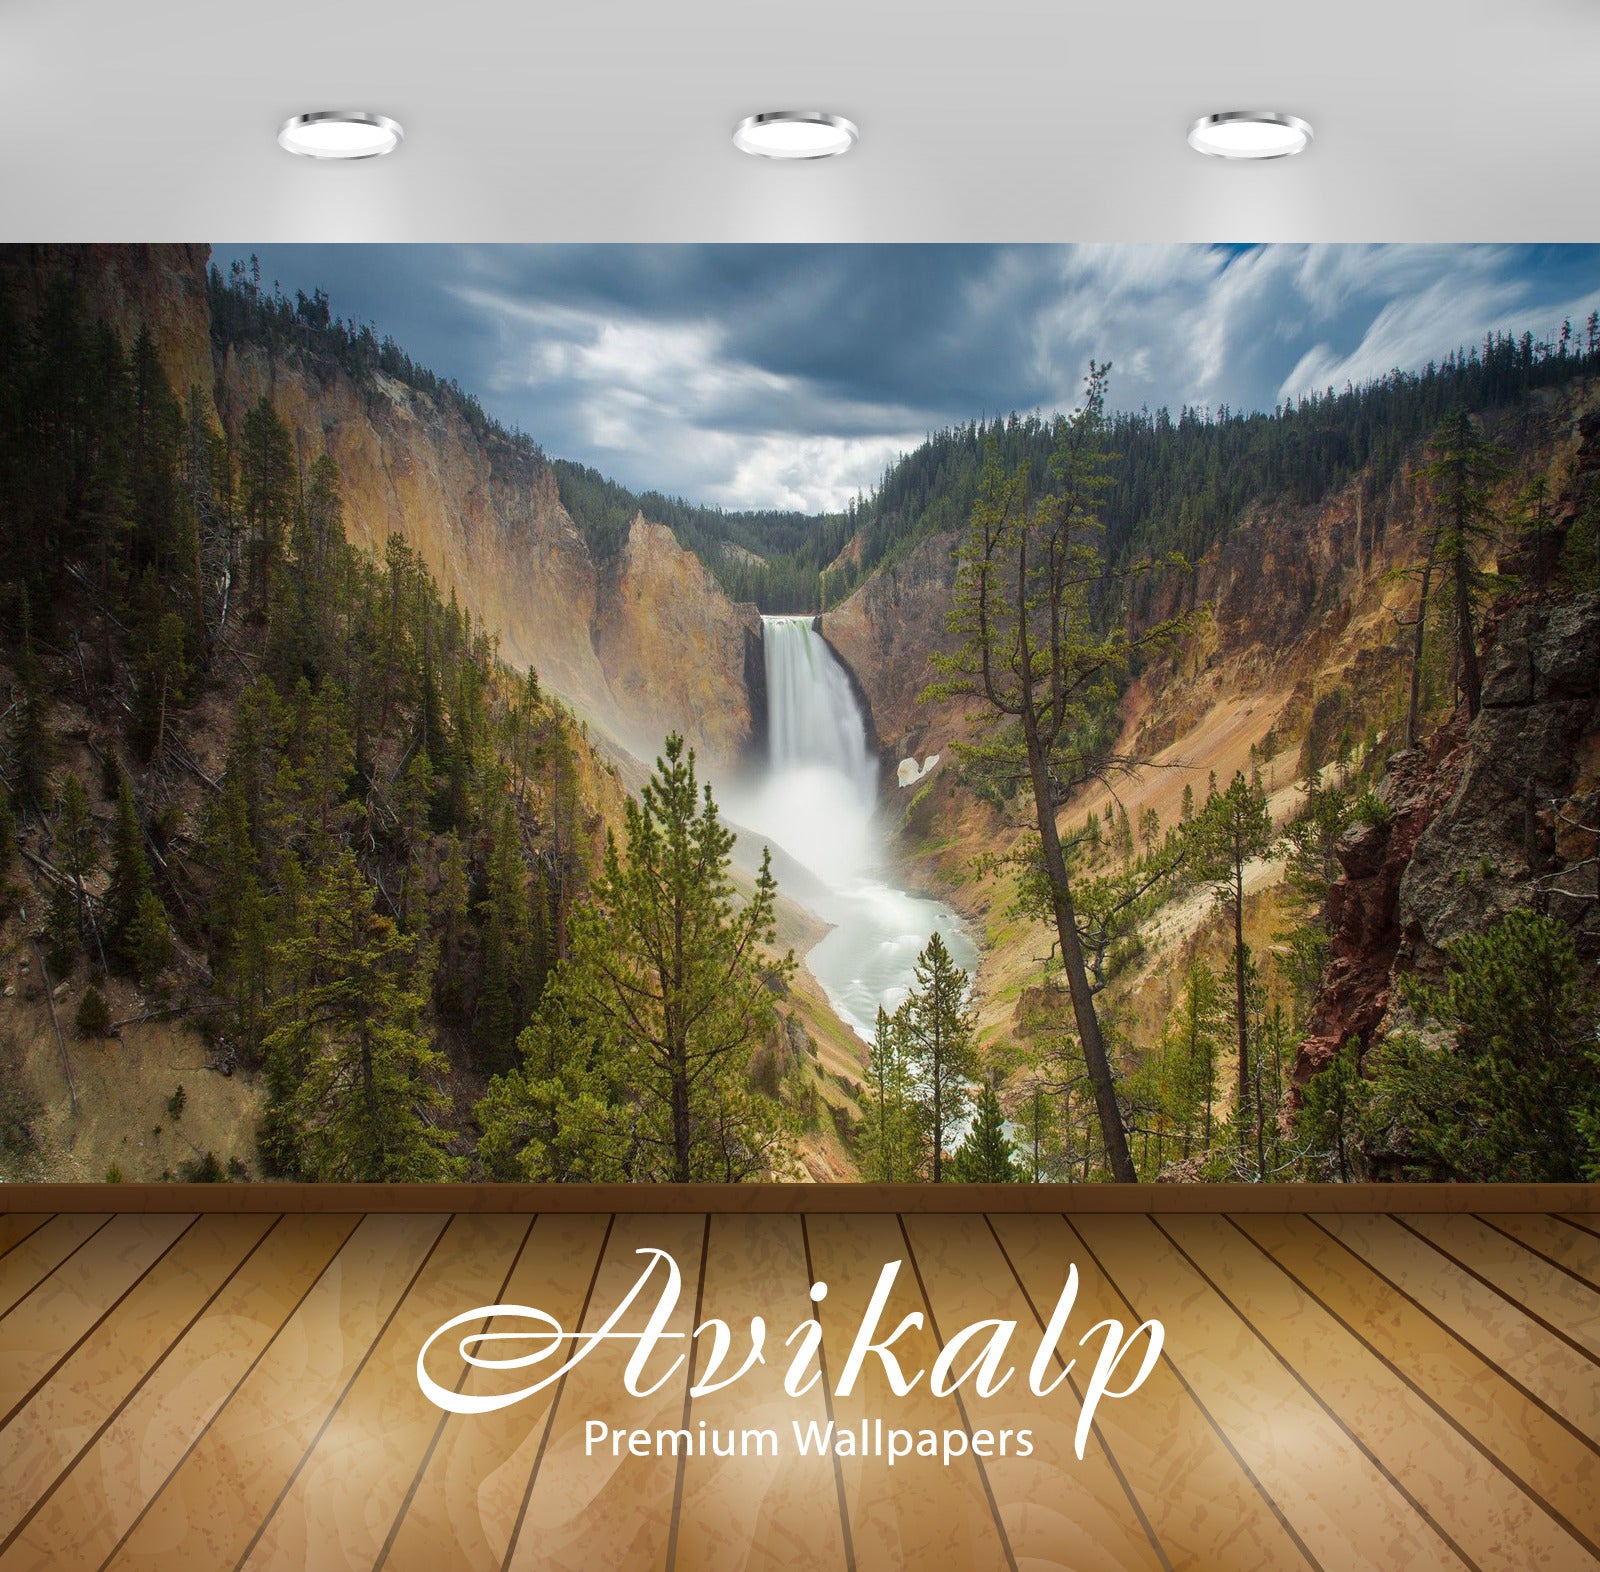 Avikalp Exclusive Awi6628 Upper Yellowstone Falls Nature Full HD Wallpapers for Living room, Hall, K